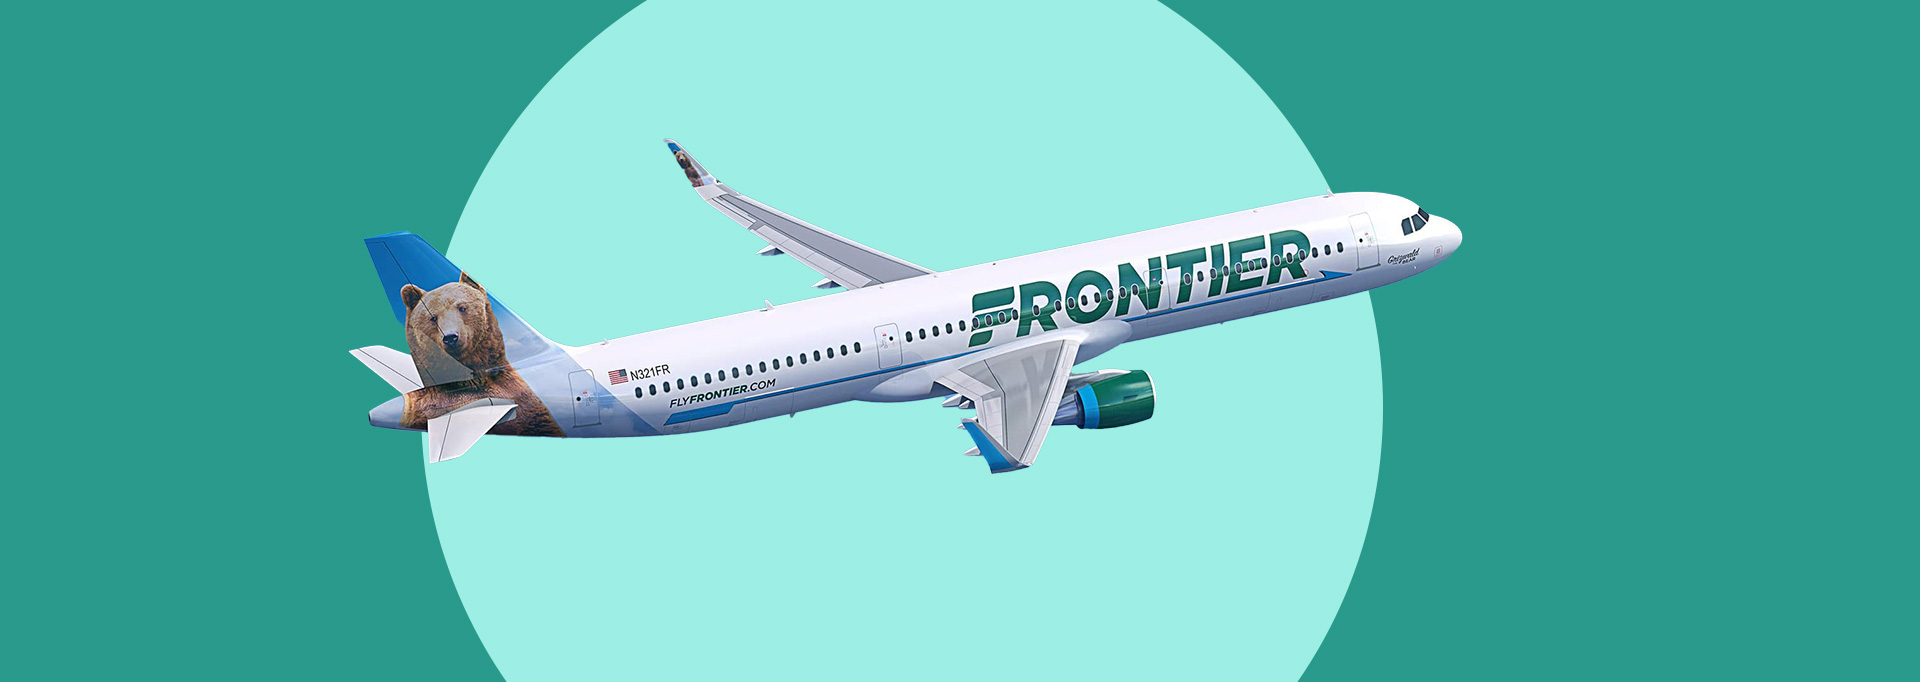 Frontier airplane